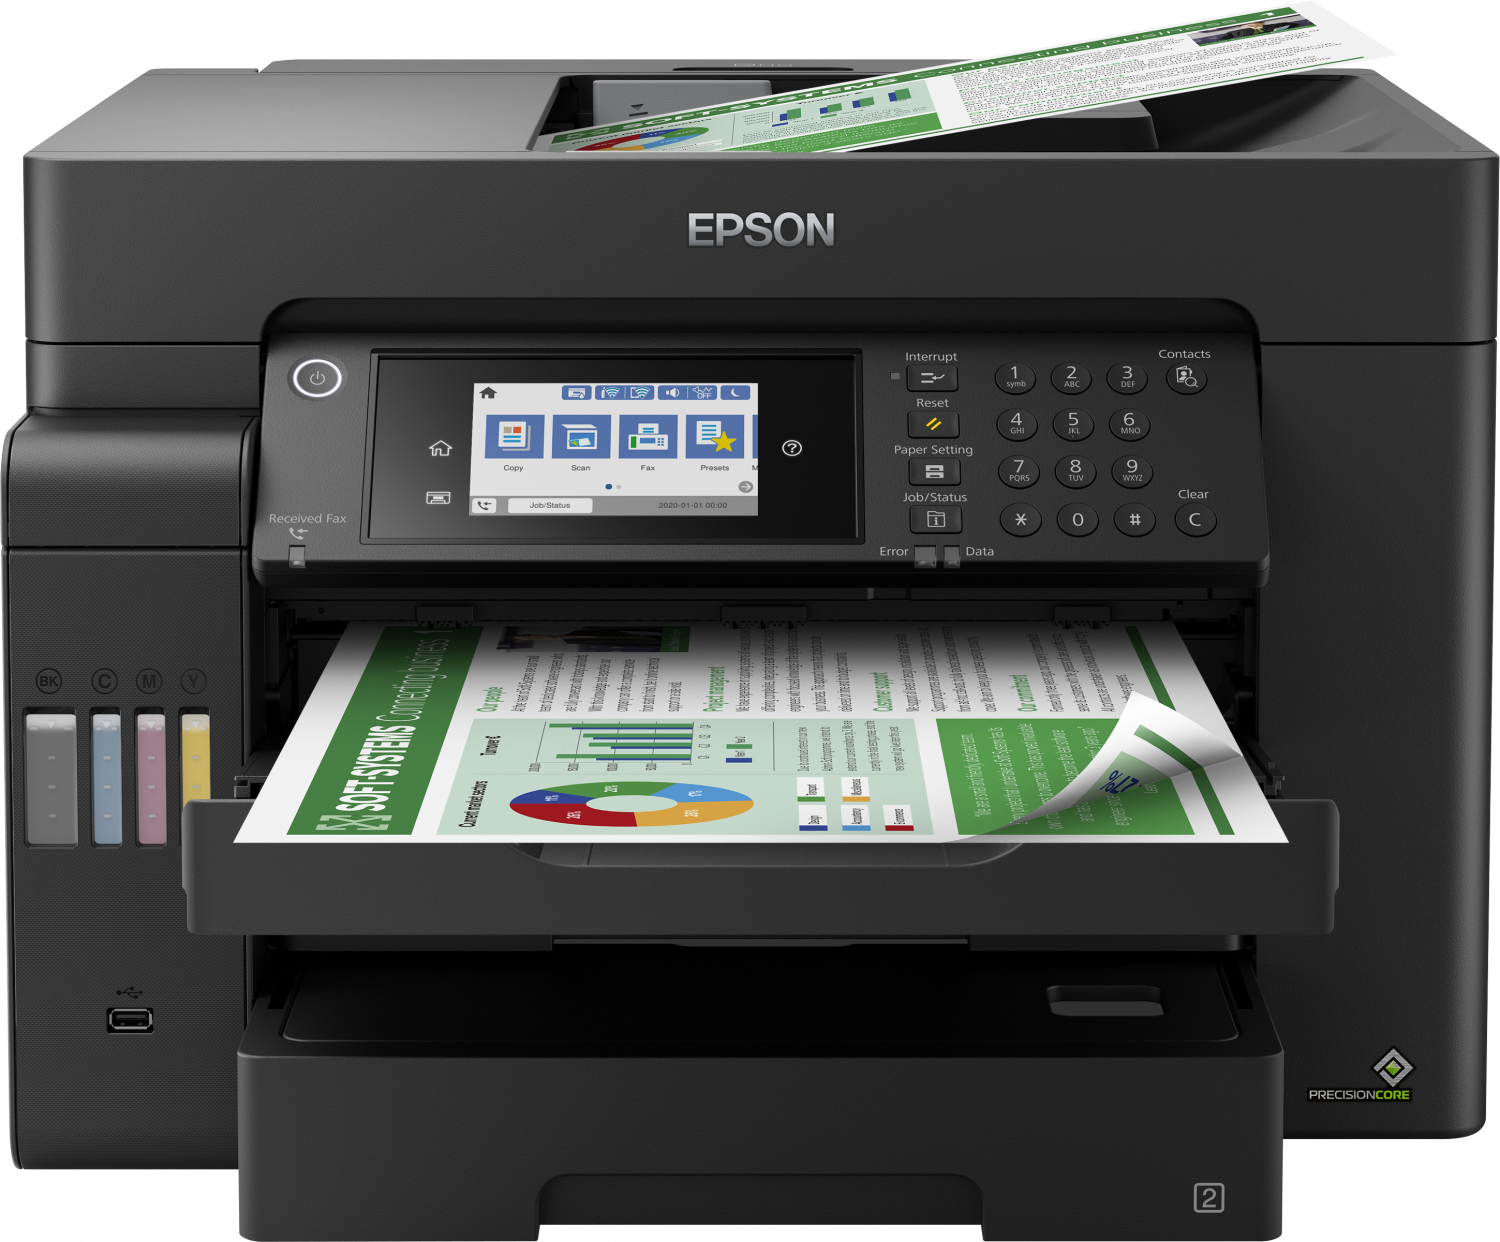 Step-by-step Driver Epson Printer ET-16600 Arch Installation - Featured